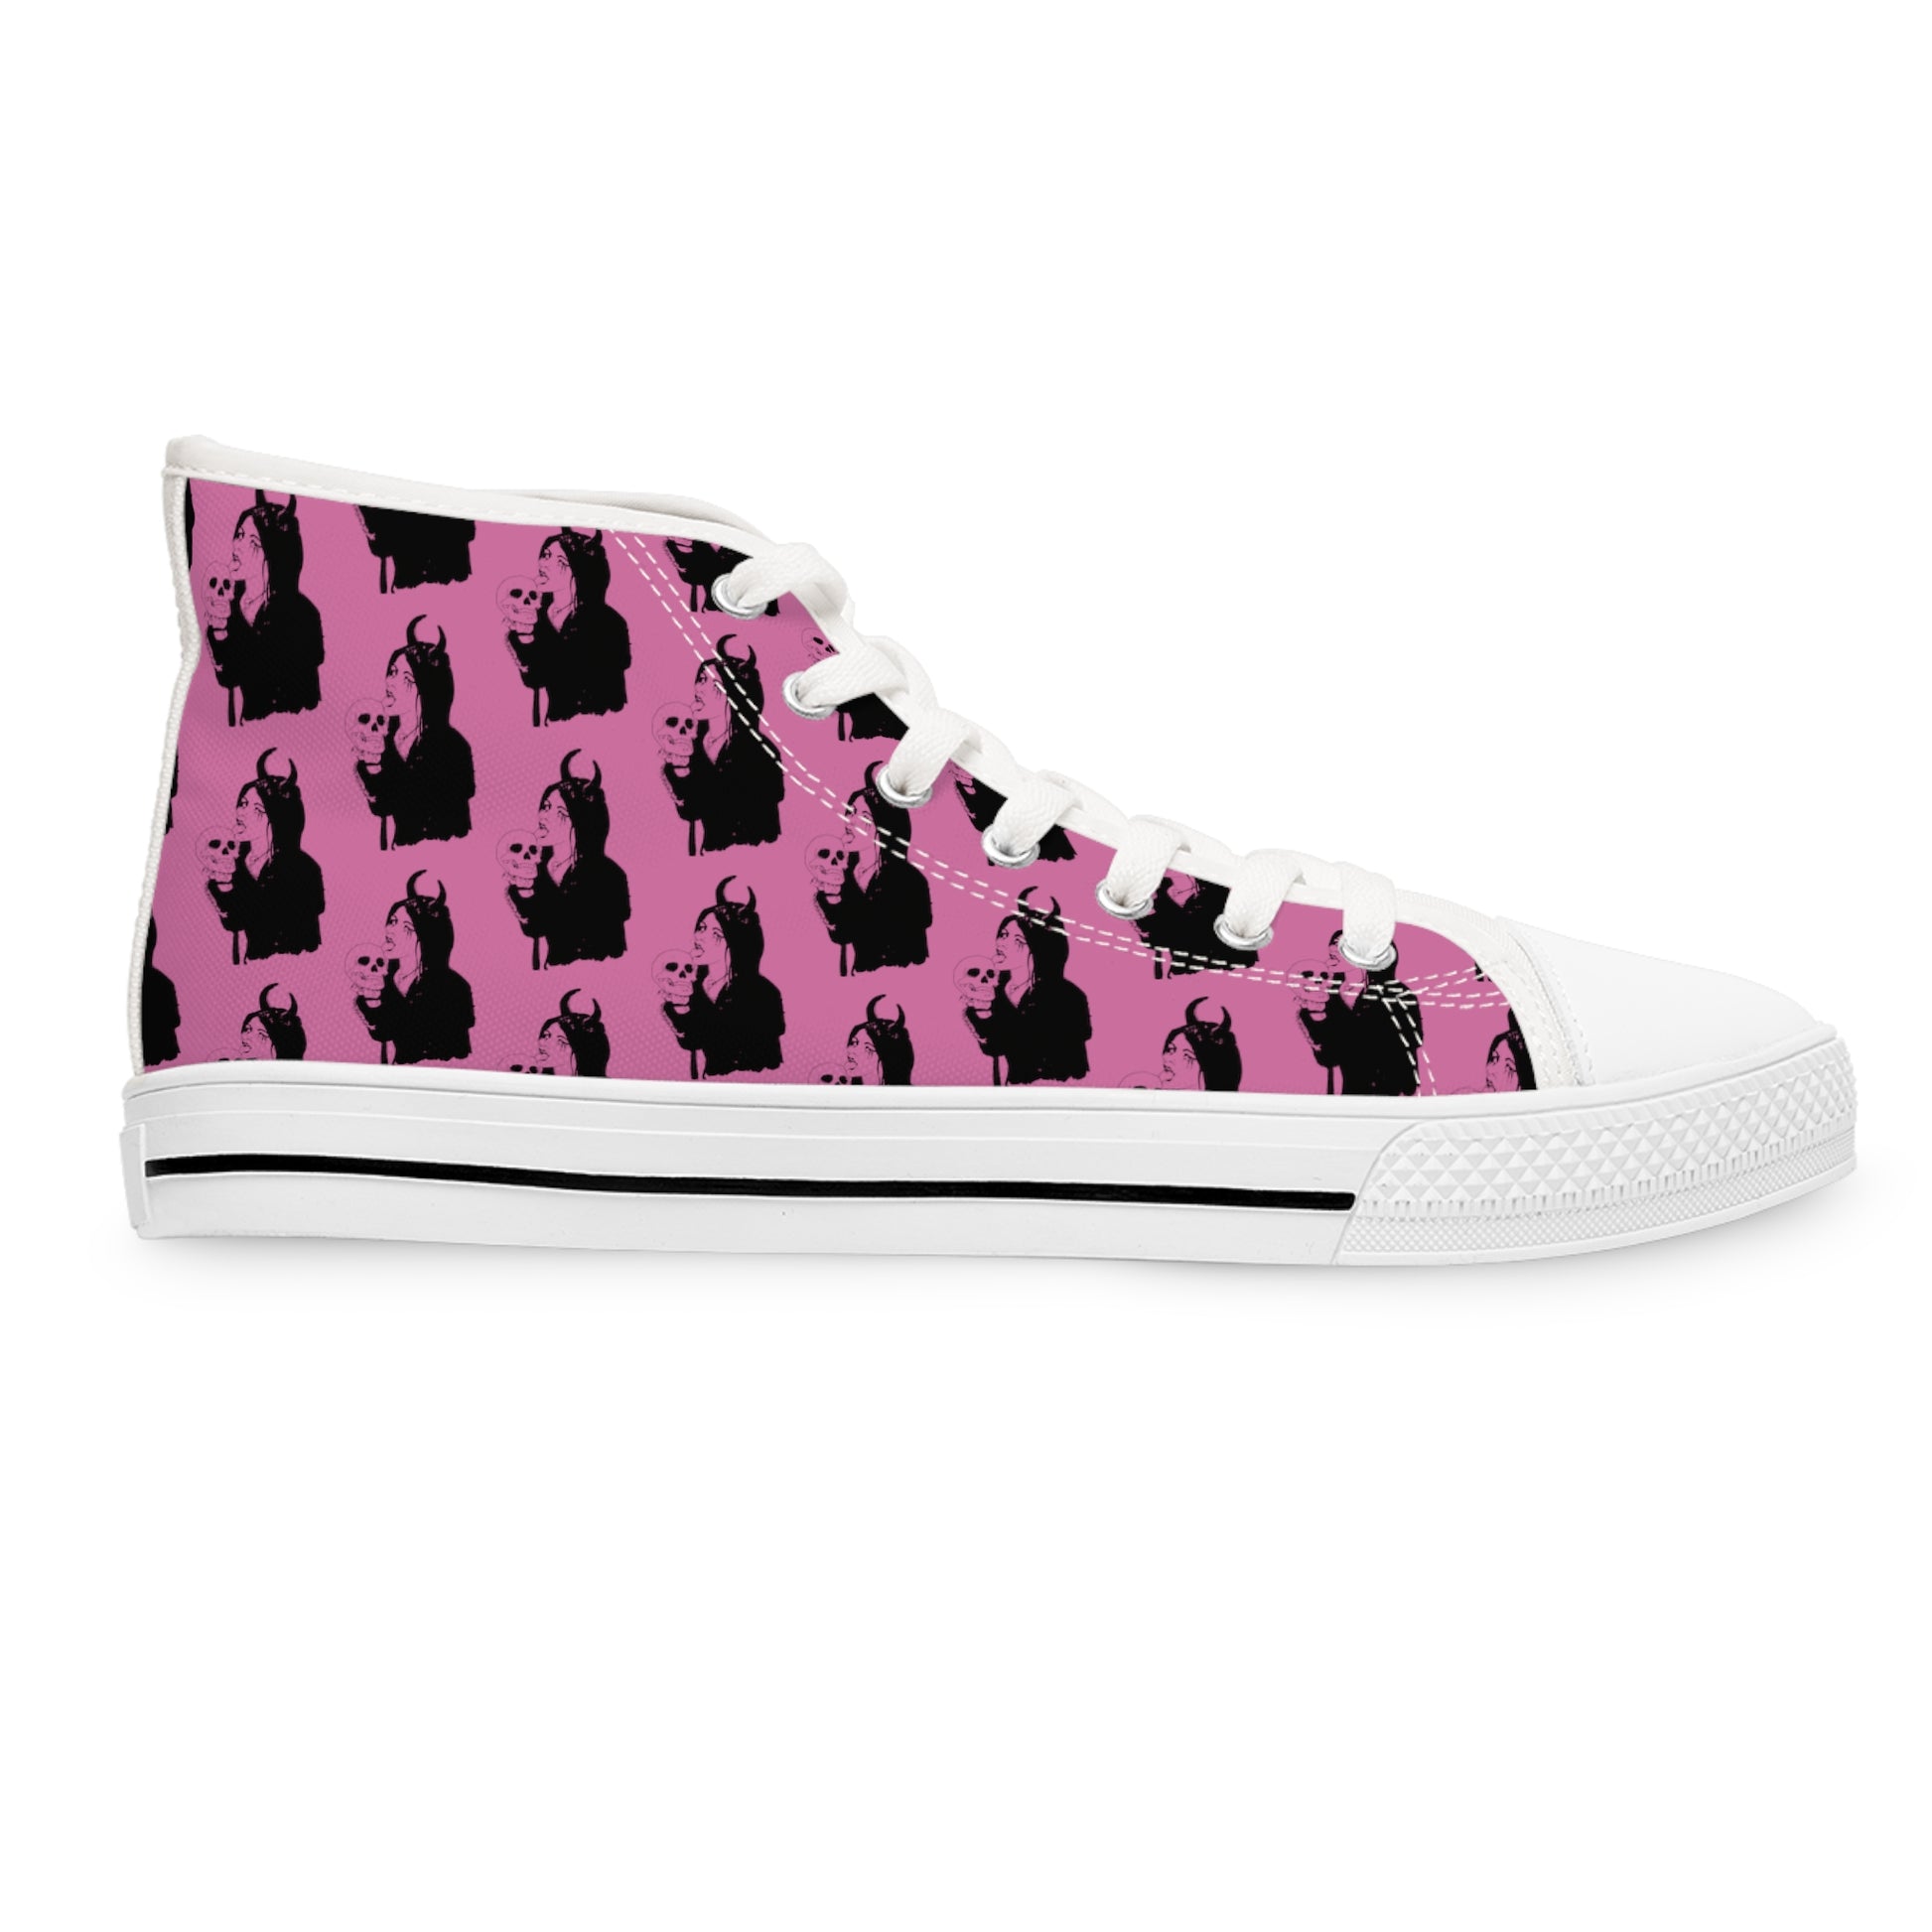 Pastel Goth Sneakers For Women With Skull Licking Gothic Woman Print Right Side